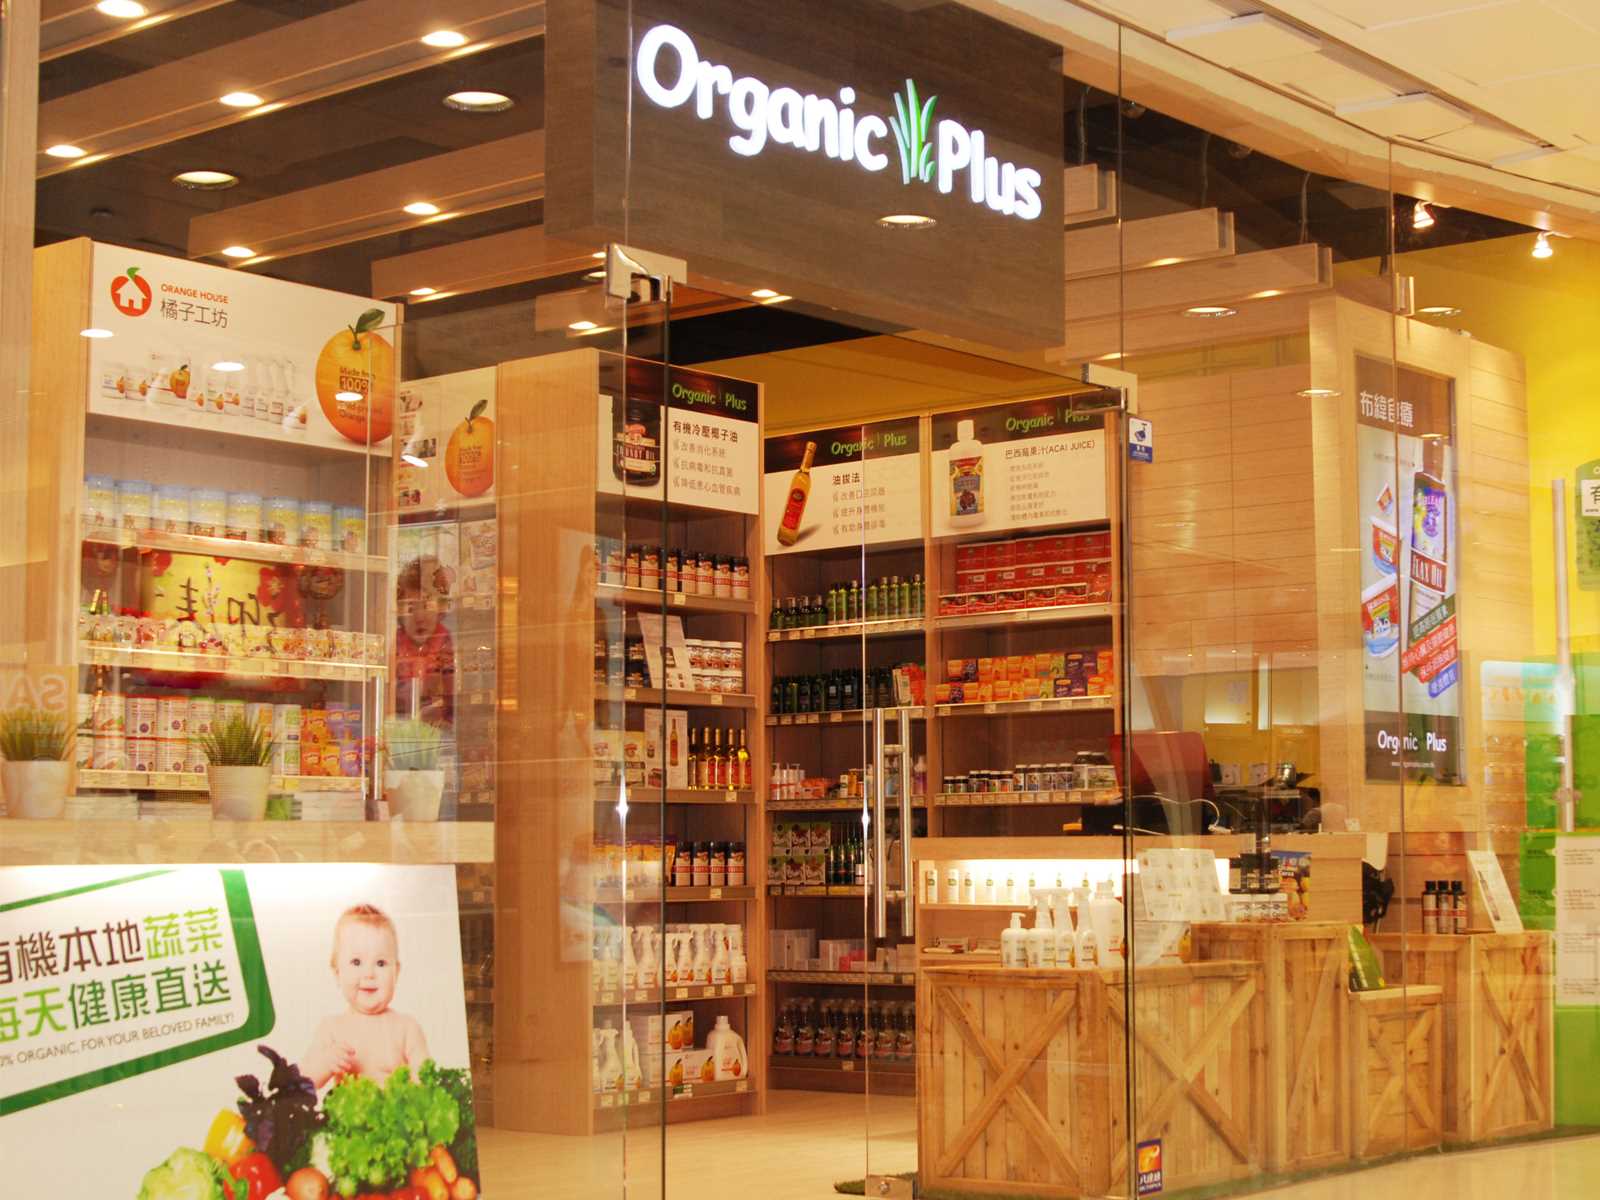 elegant schermutseling Forensische geneeskunde Our Stores-HK healthy and organic food choices| Organic Plus